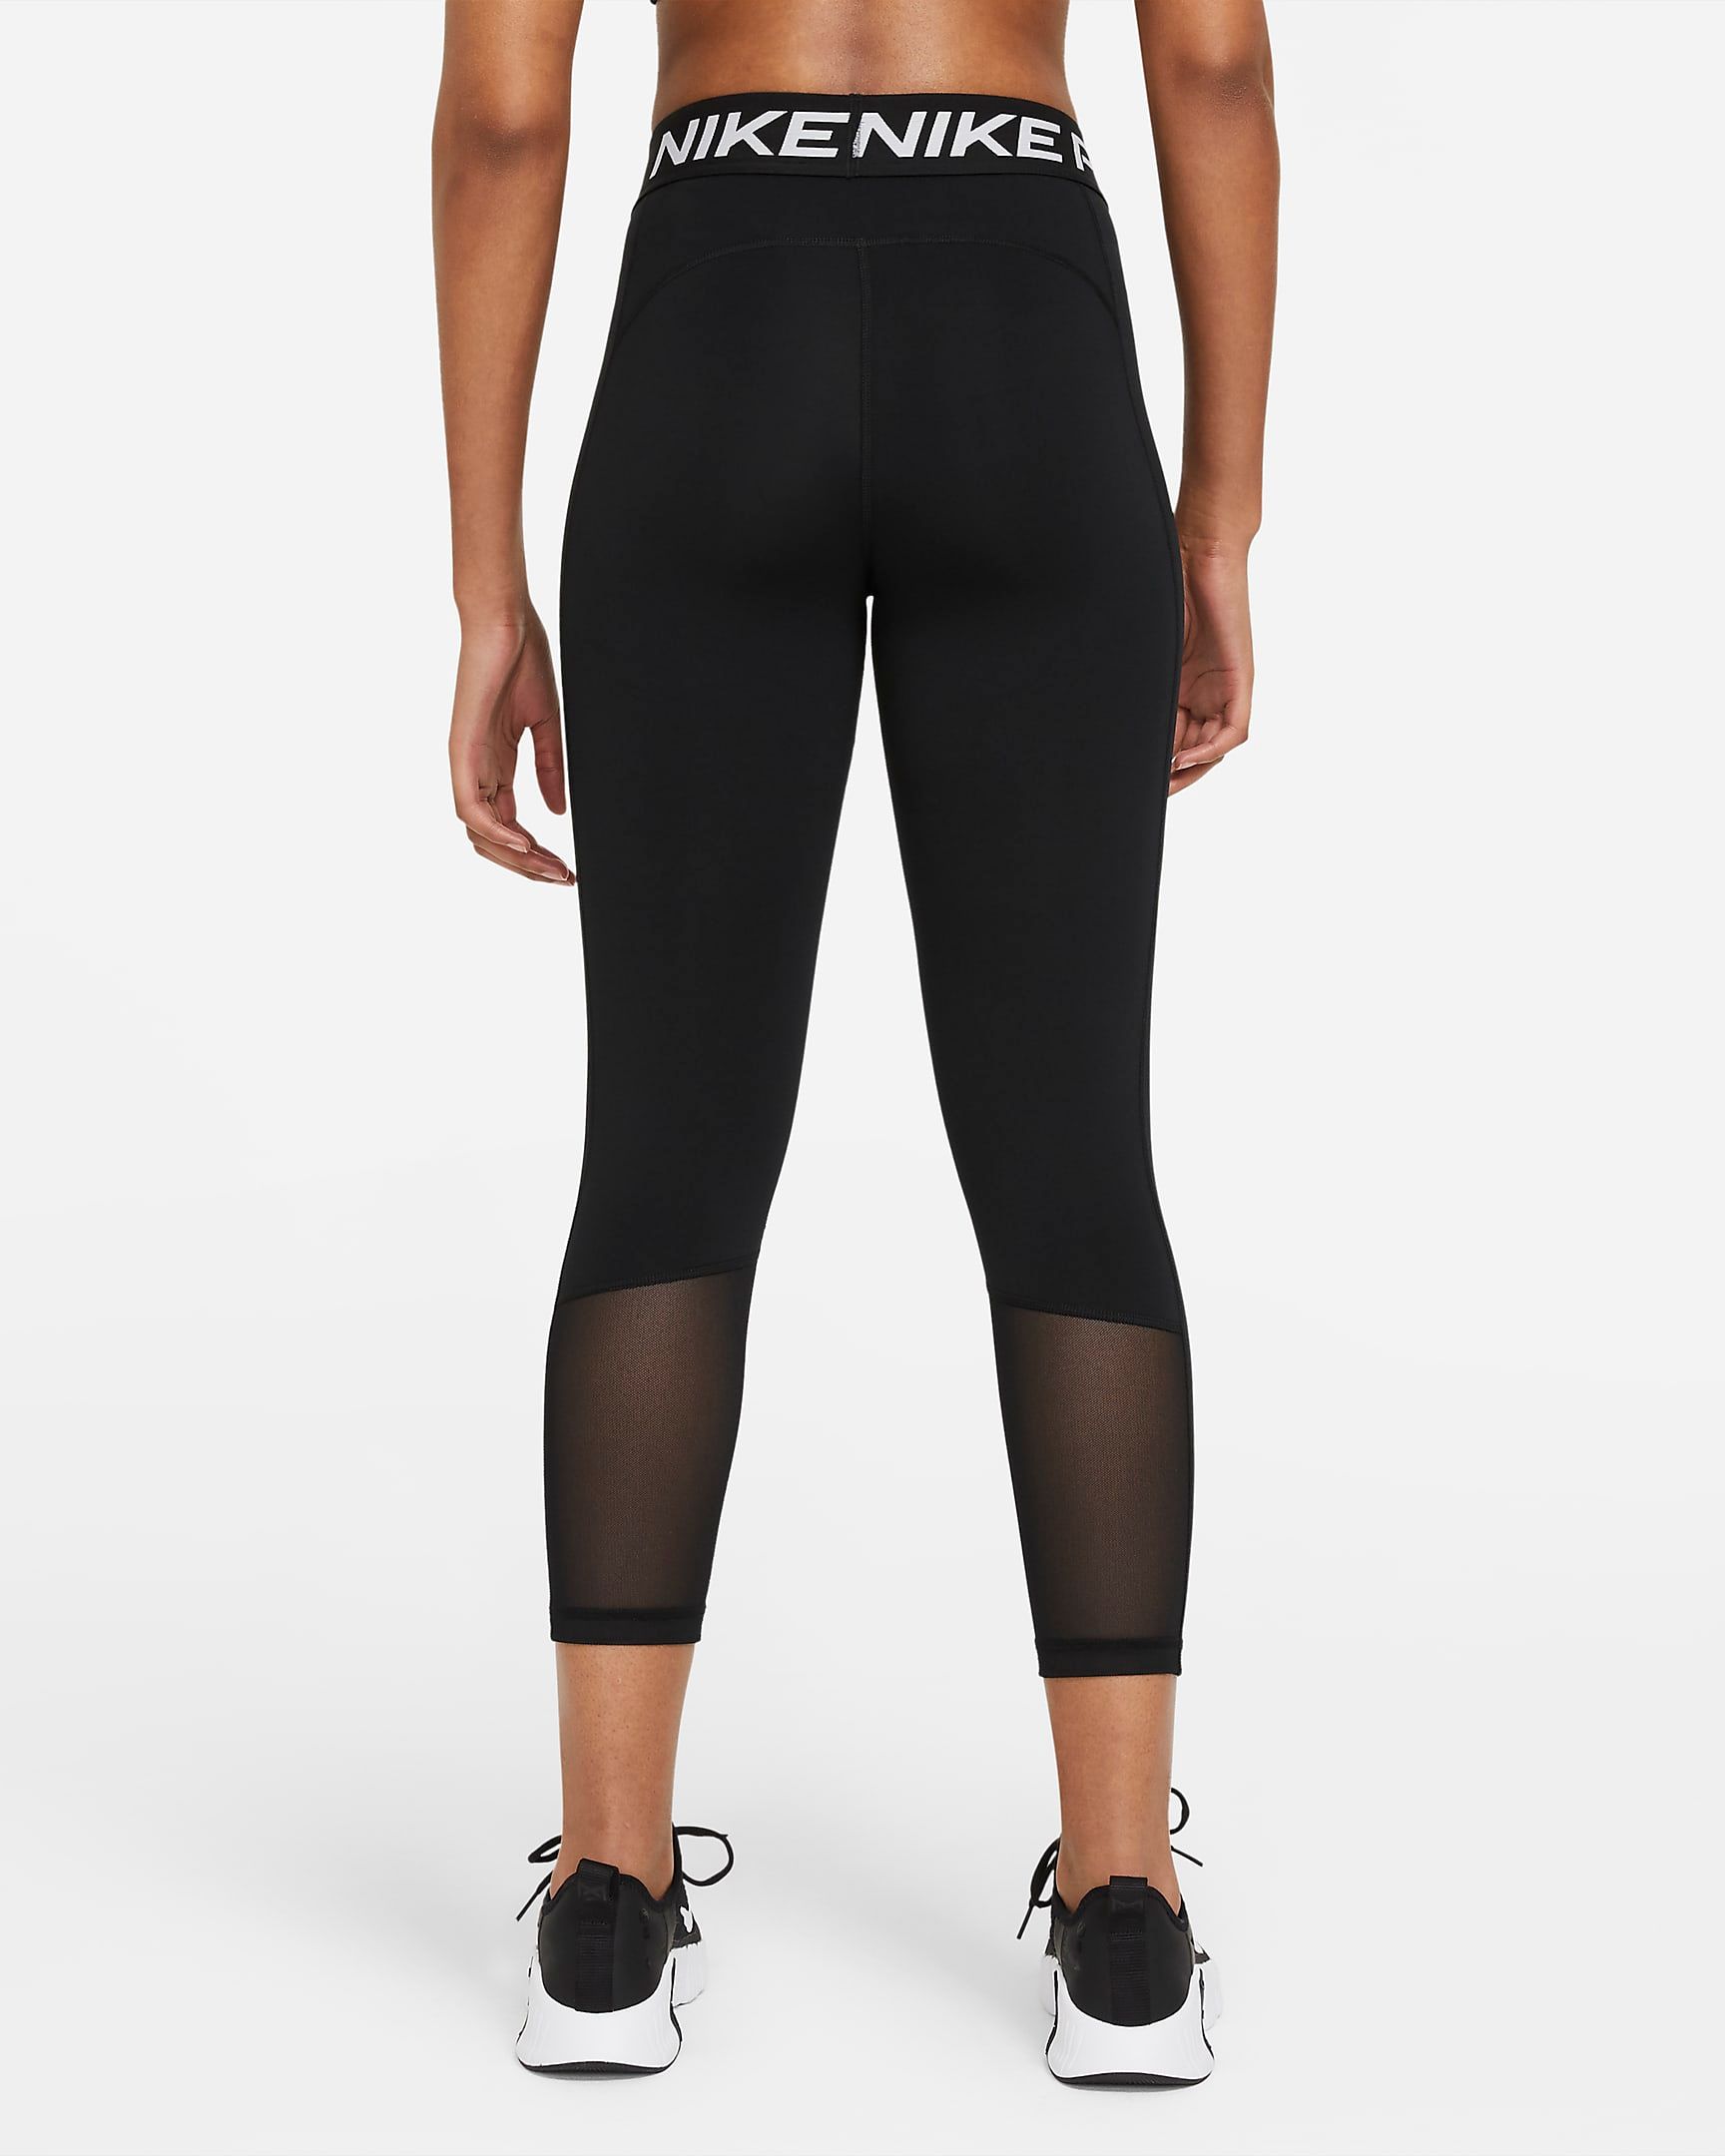 Gym goers are ditching their pricey leggings for this  pair